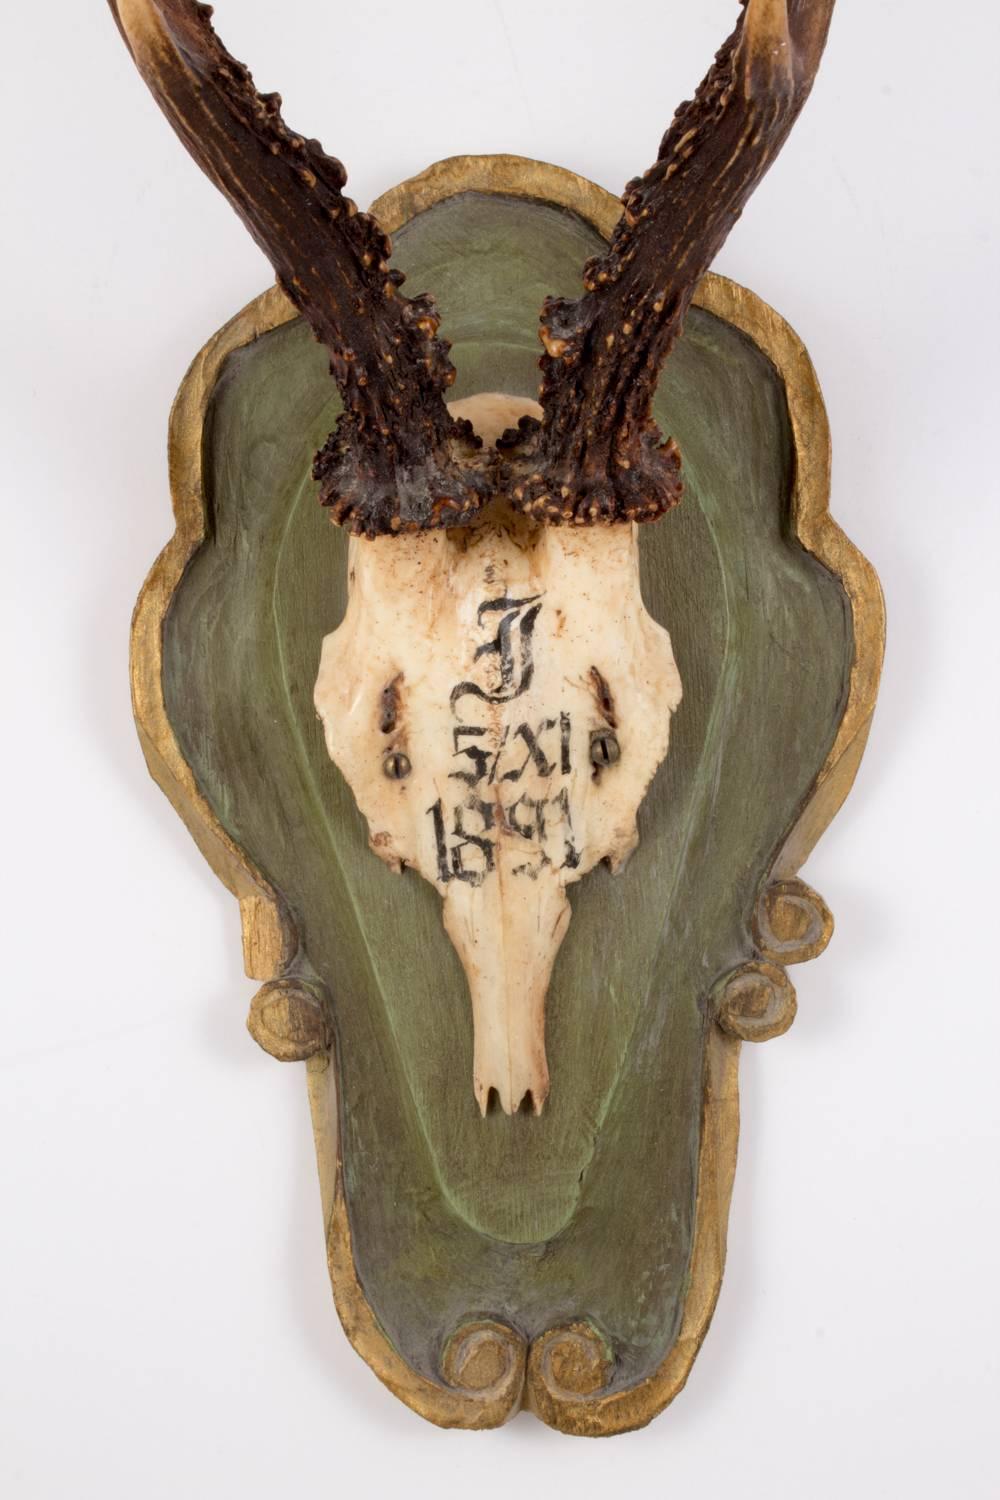 19th century Roe Deer trophy believed to have been taken by Emperor Franz Joseph during his time at the Kaiservilla, the summer palace of the great Austro-Hungarian monarchy in the small village of Bad Ischl, Austria. Original plaque and writing on